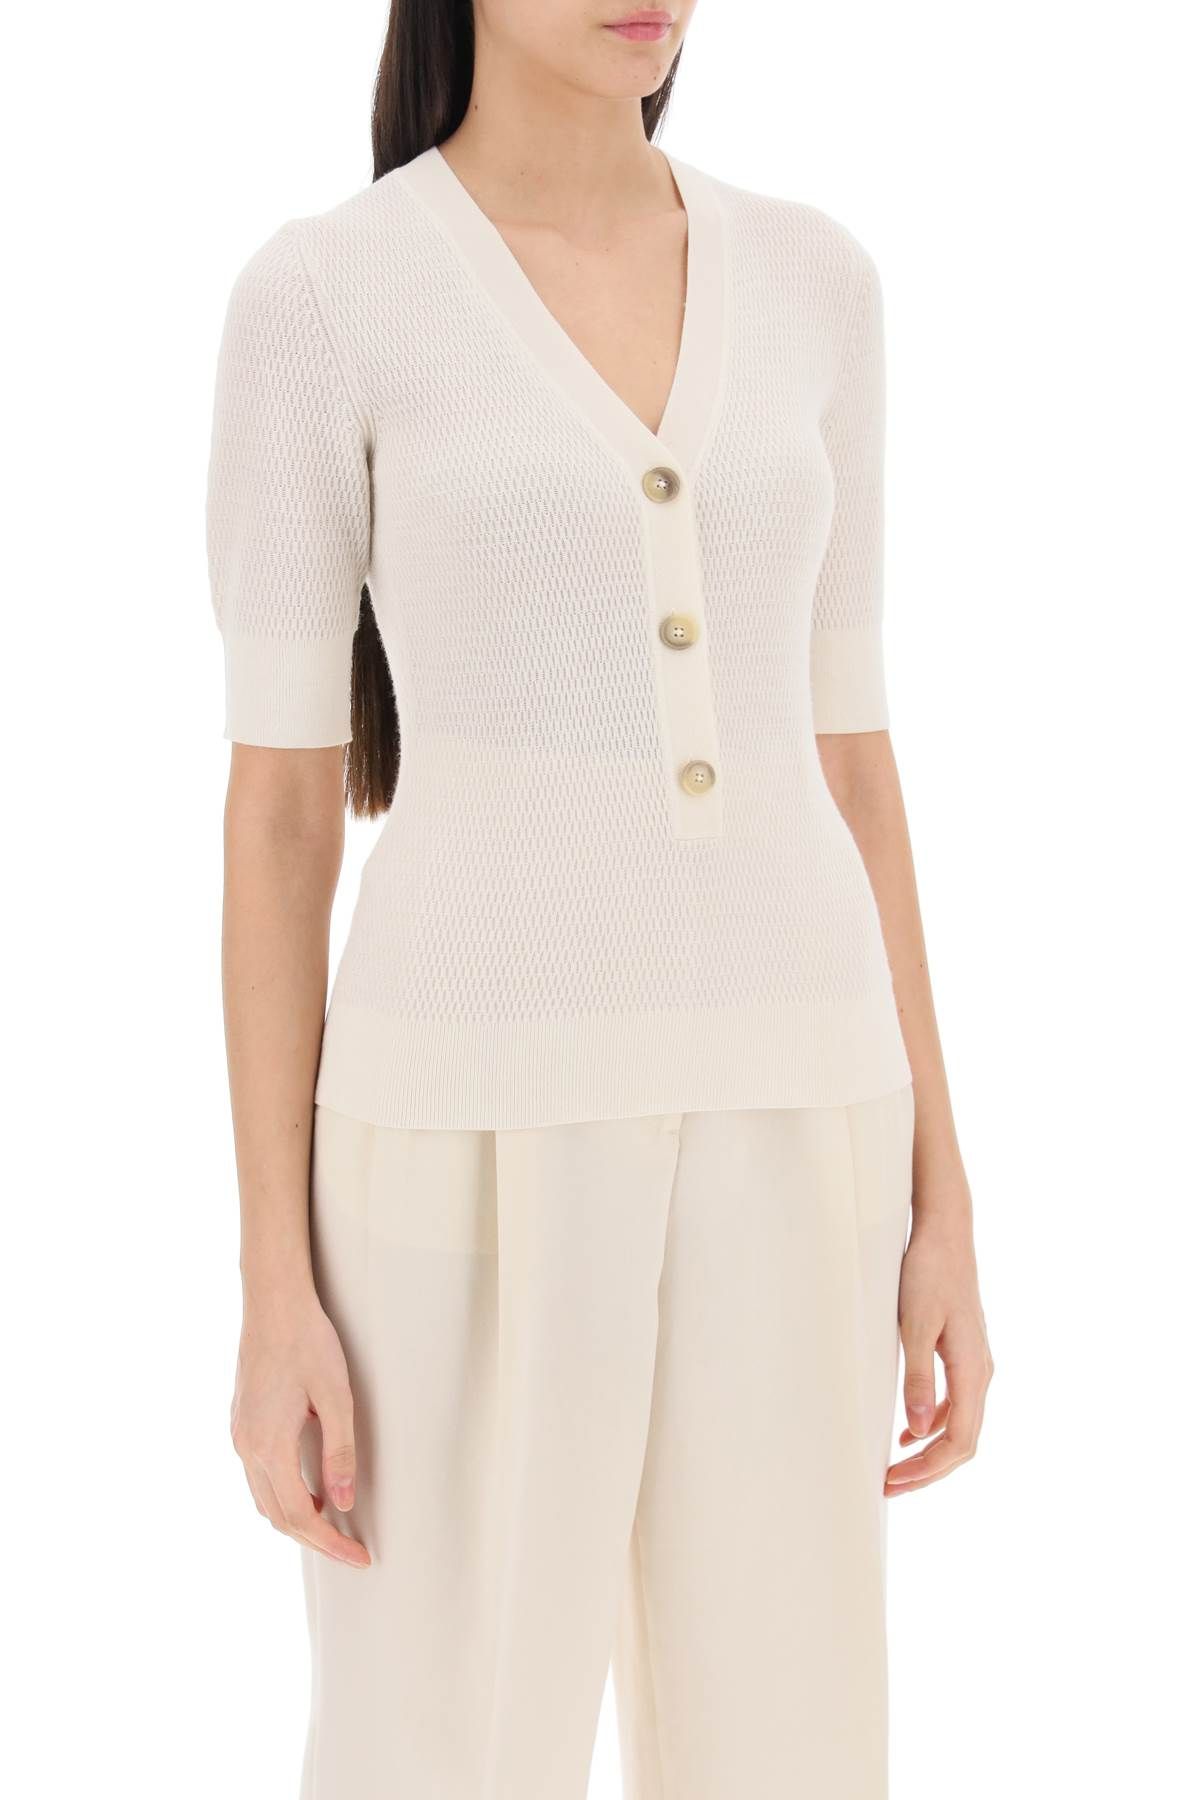 Shop Closed Knitted Top With Short Sleeves In White,neutro